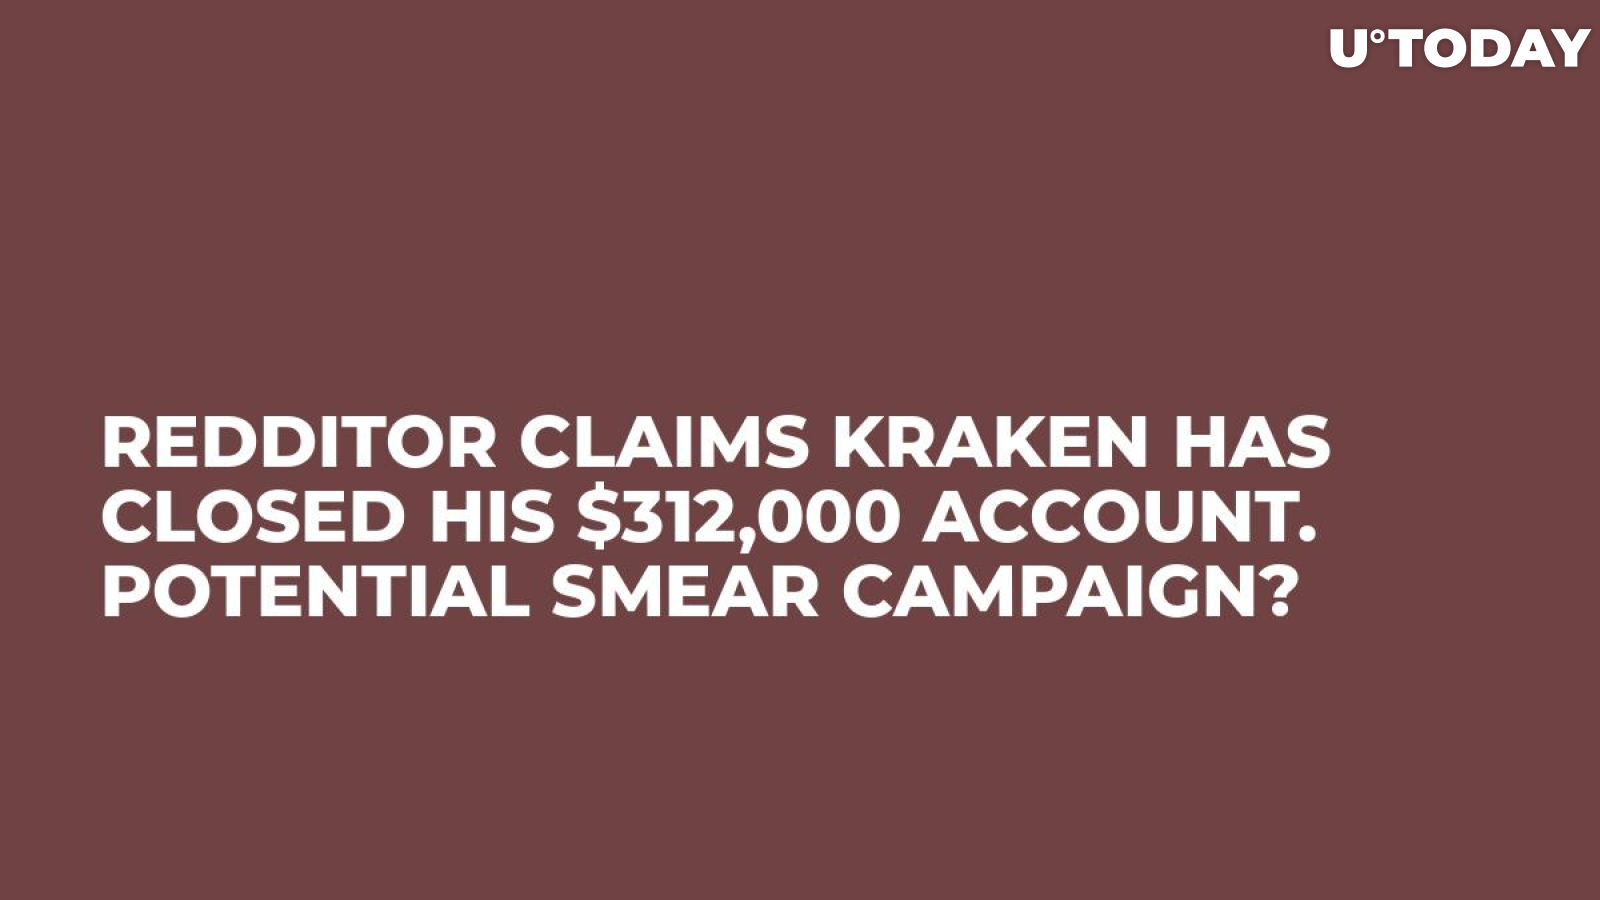 Redditor Claims Kraken Has Closed His $312,000 Account. Potential Smear Campaign?